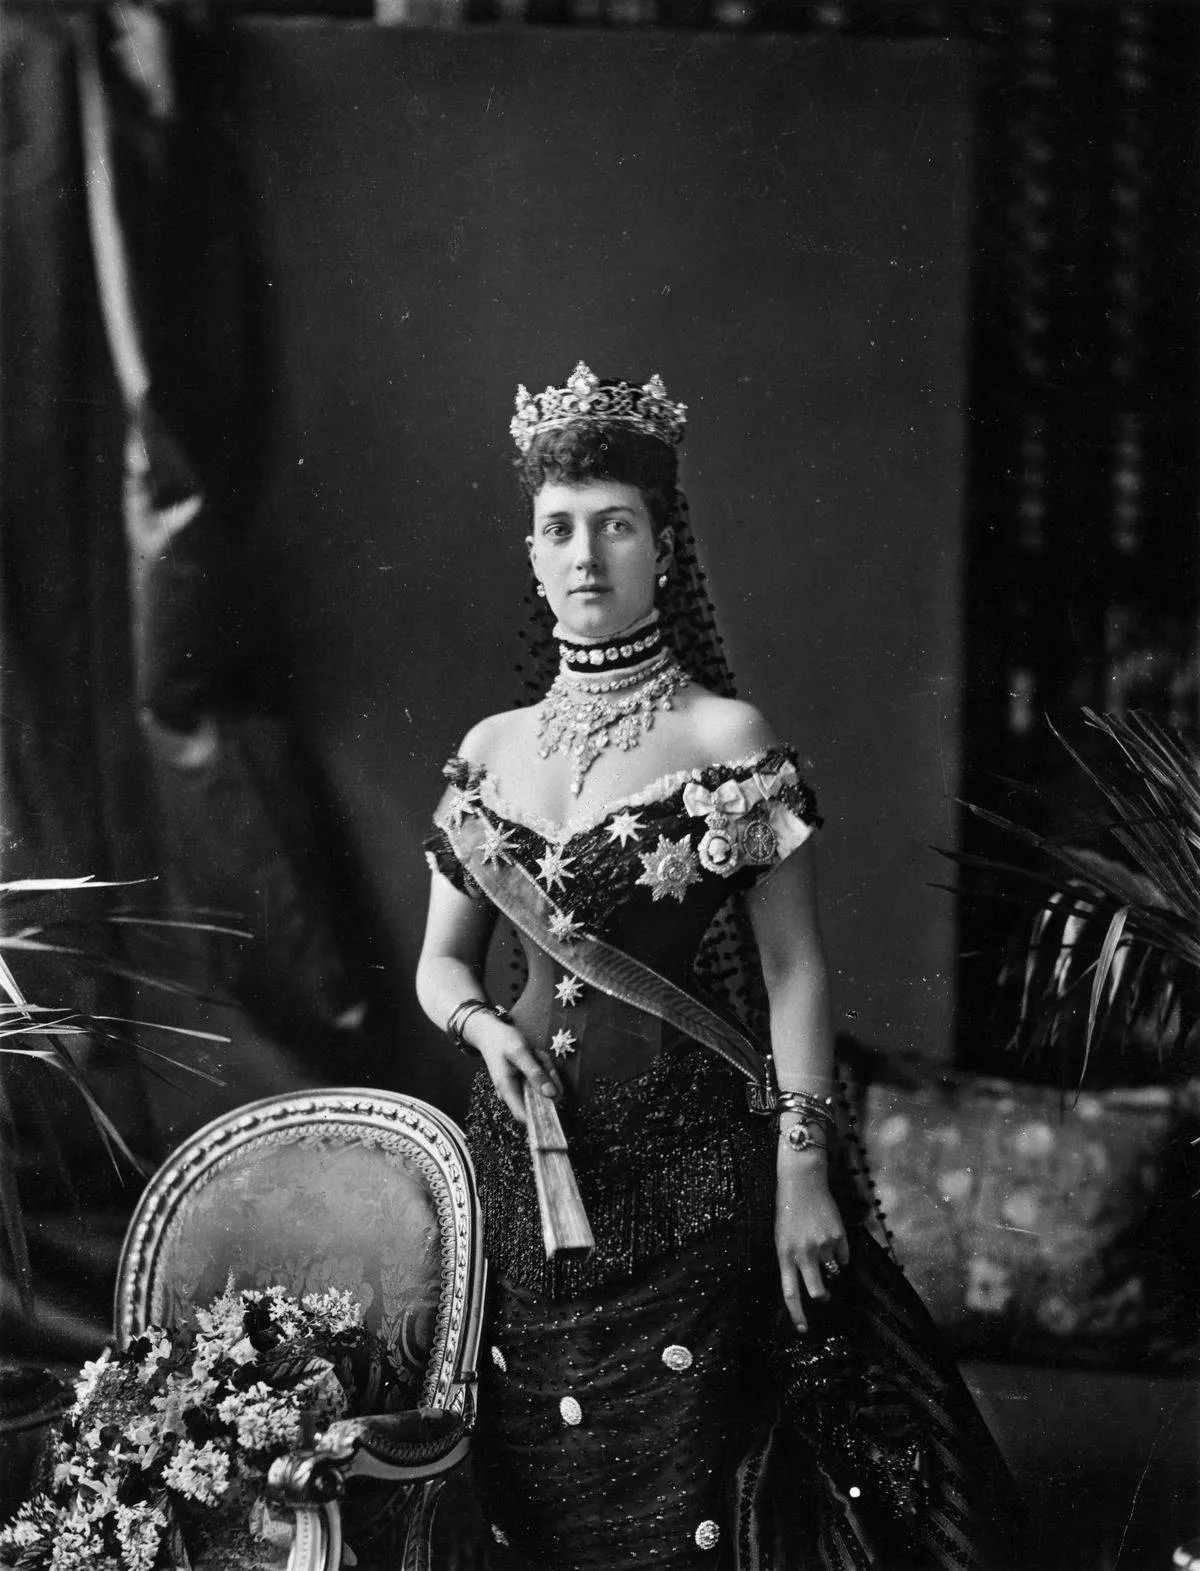 <p>This tiara, seen atop Queen Alexandra's head, has not been seen in over a century. Although it's known as the <a href="https://www.thecourtjeweller.com/2014/06/queen-alexandras-wedding-gift-tiara.html" rel="noopener noreferrer">Rundell Tiara</a>, and there was a jeweler named Rundell, Bridge and Rundell, this piece was actually made by the jeweler Gerrard. It was part of a set that also included earrings, a necklace, and a brooch. </p> <p>According to a book called<i><a href="https://www.amazon.com/Queens-Diamonds-Hugh-Roberts/dp/1905686382" rel="noopener noreferrer"> In The Queen's Diamonds</a></i> by Hugh Roberts, the tiara was bequeathed to Alexandra's daughter Princess Victoria and was "disposed of by her." </p>